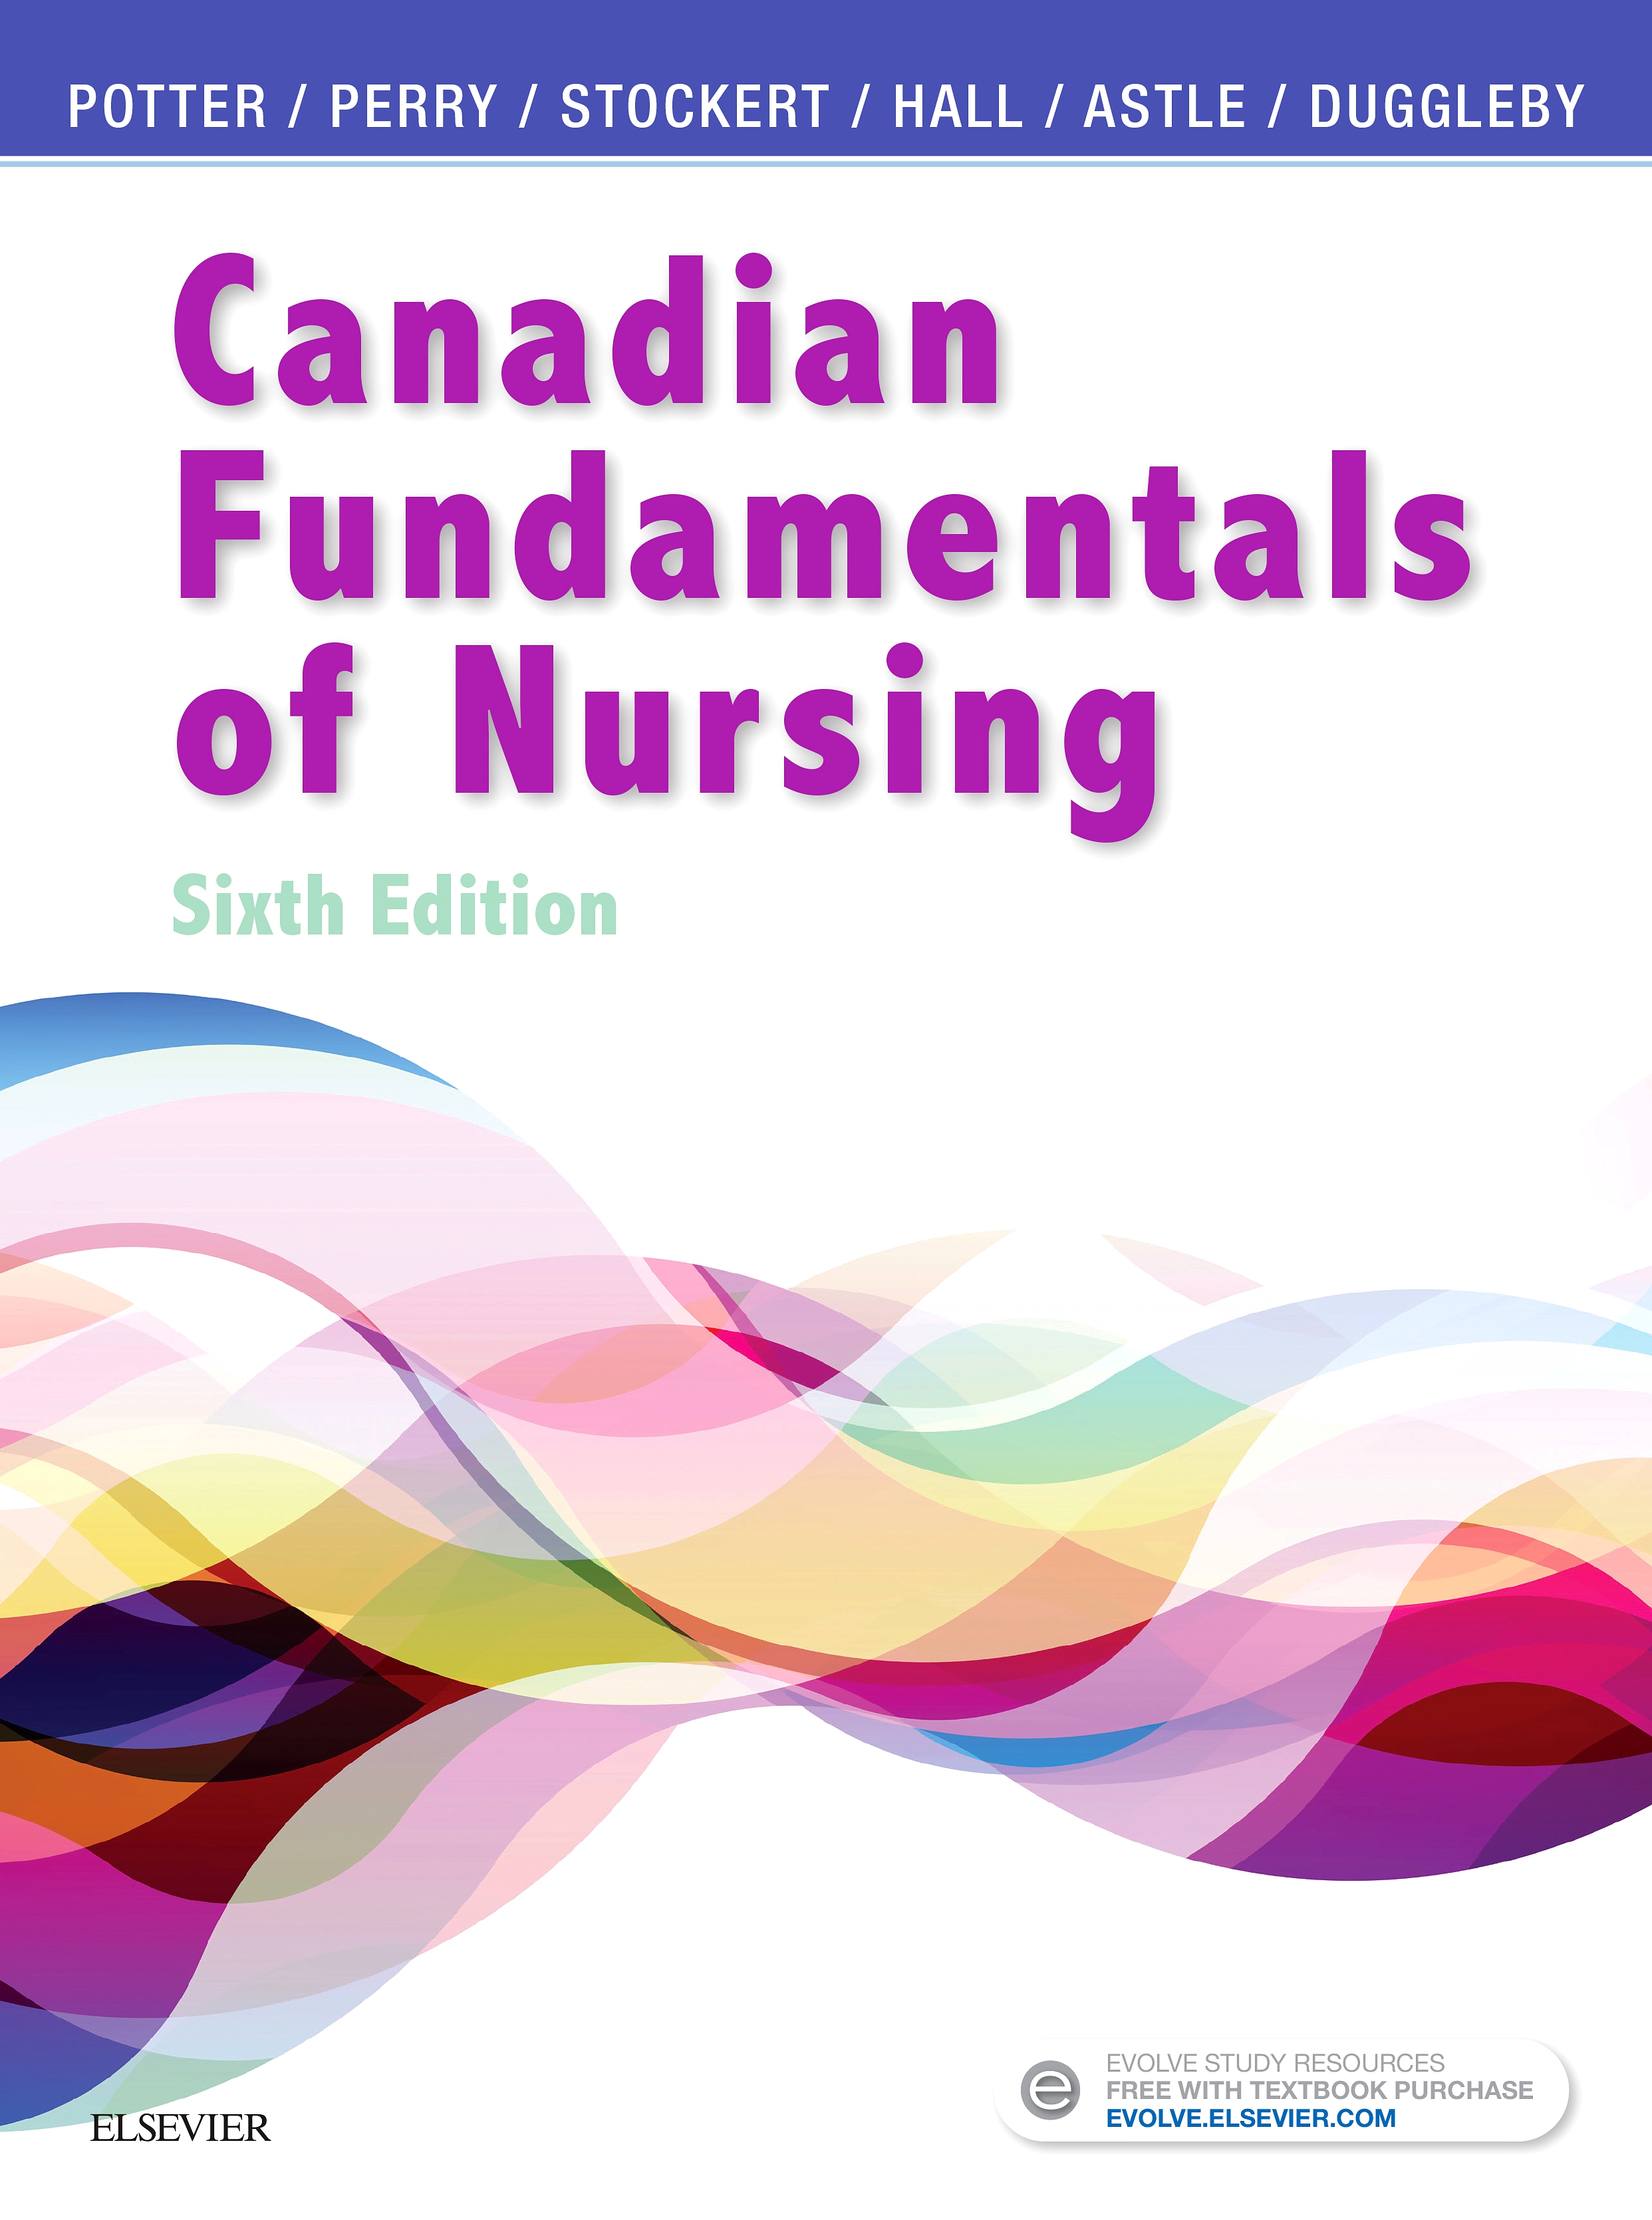 Evolve Resources for Canadian Fundamentals of Nursing, 6th Edition